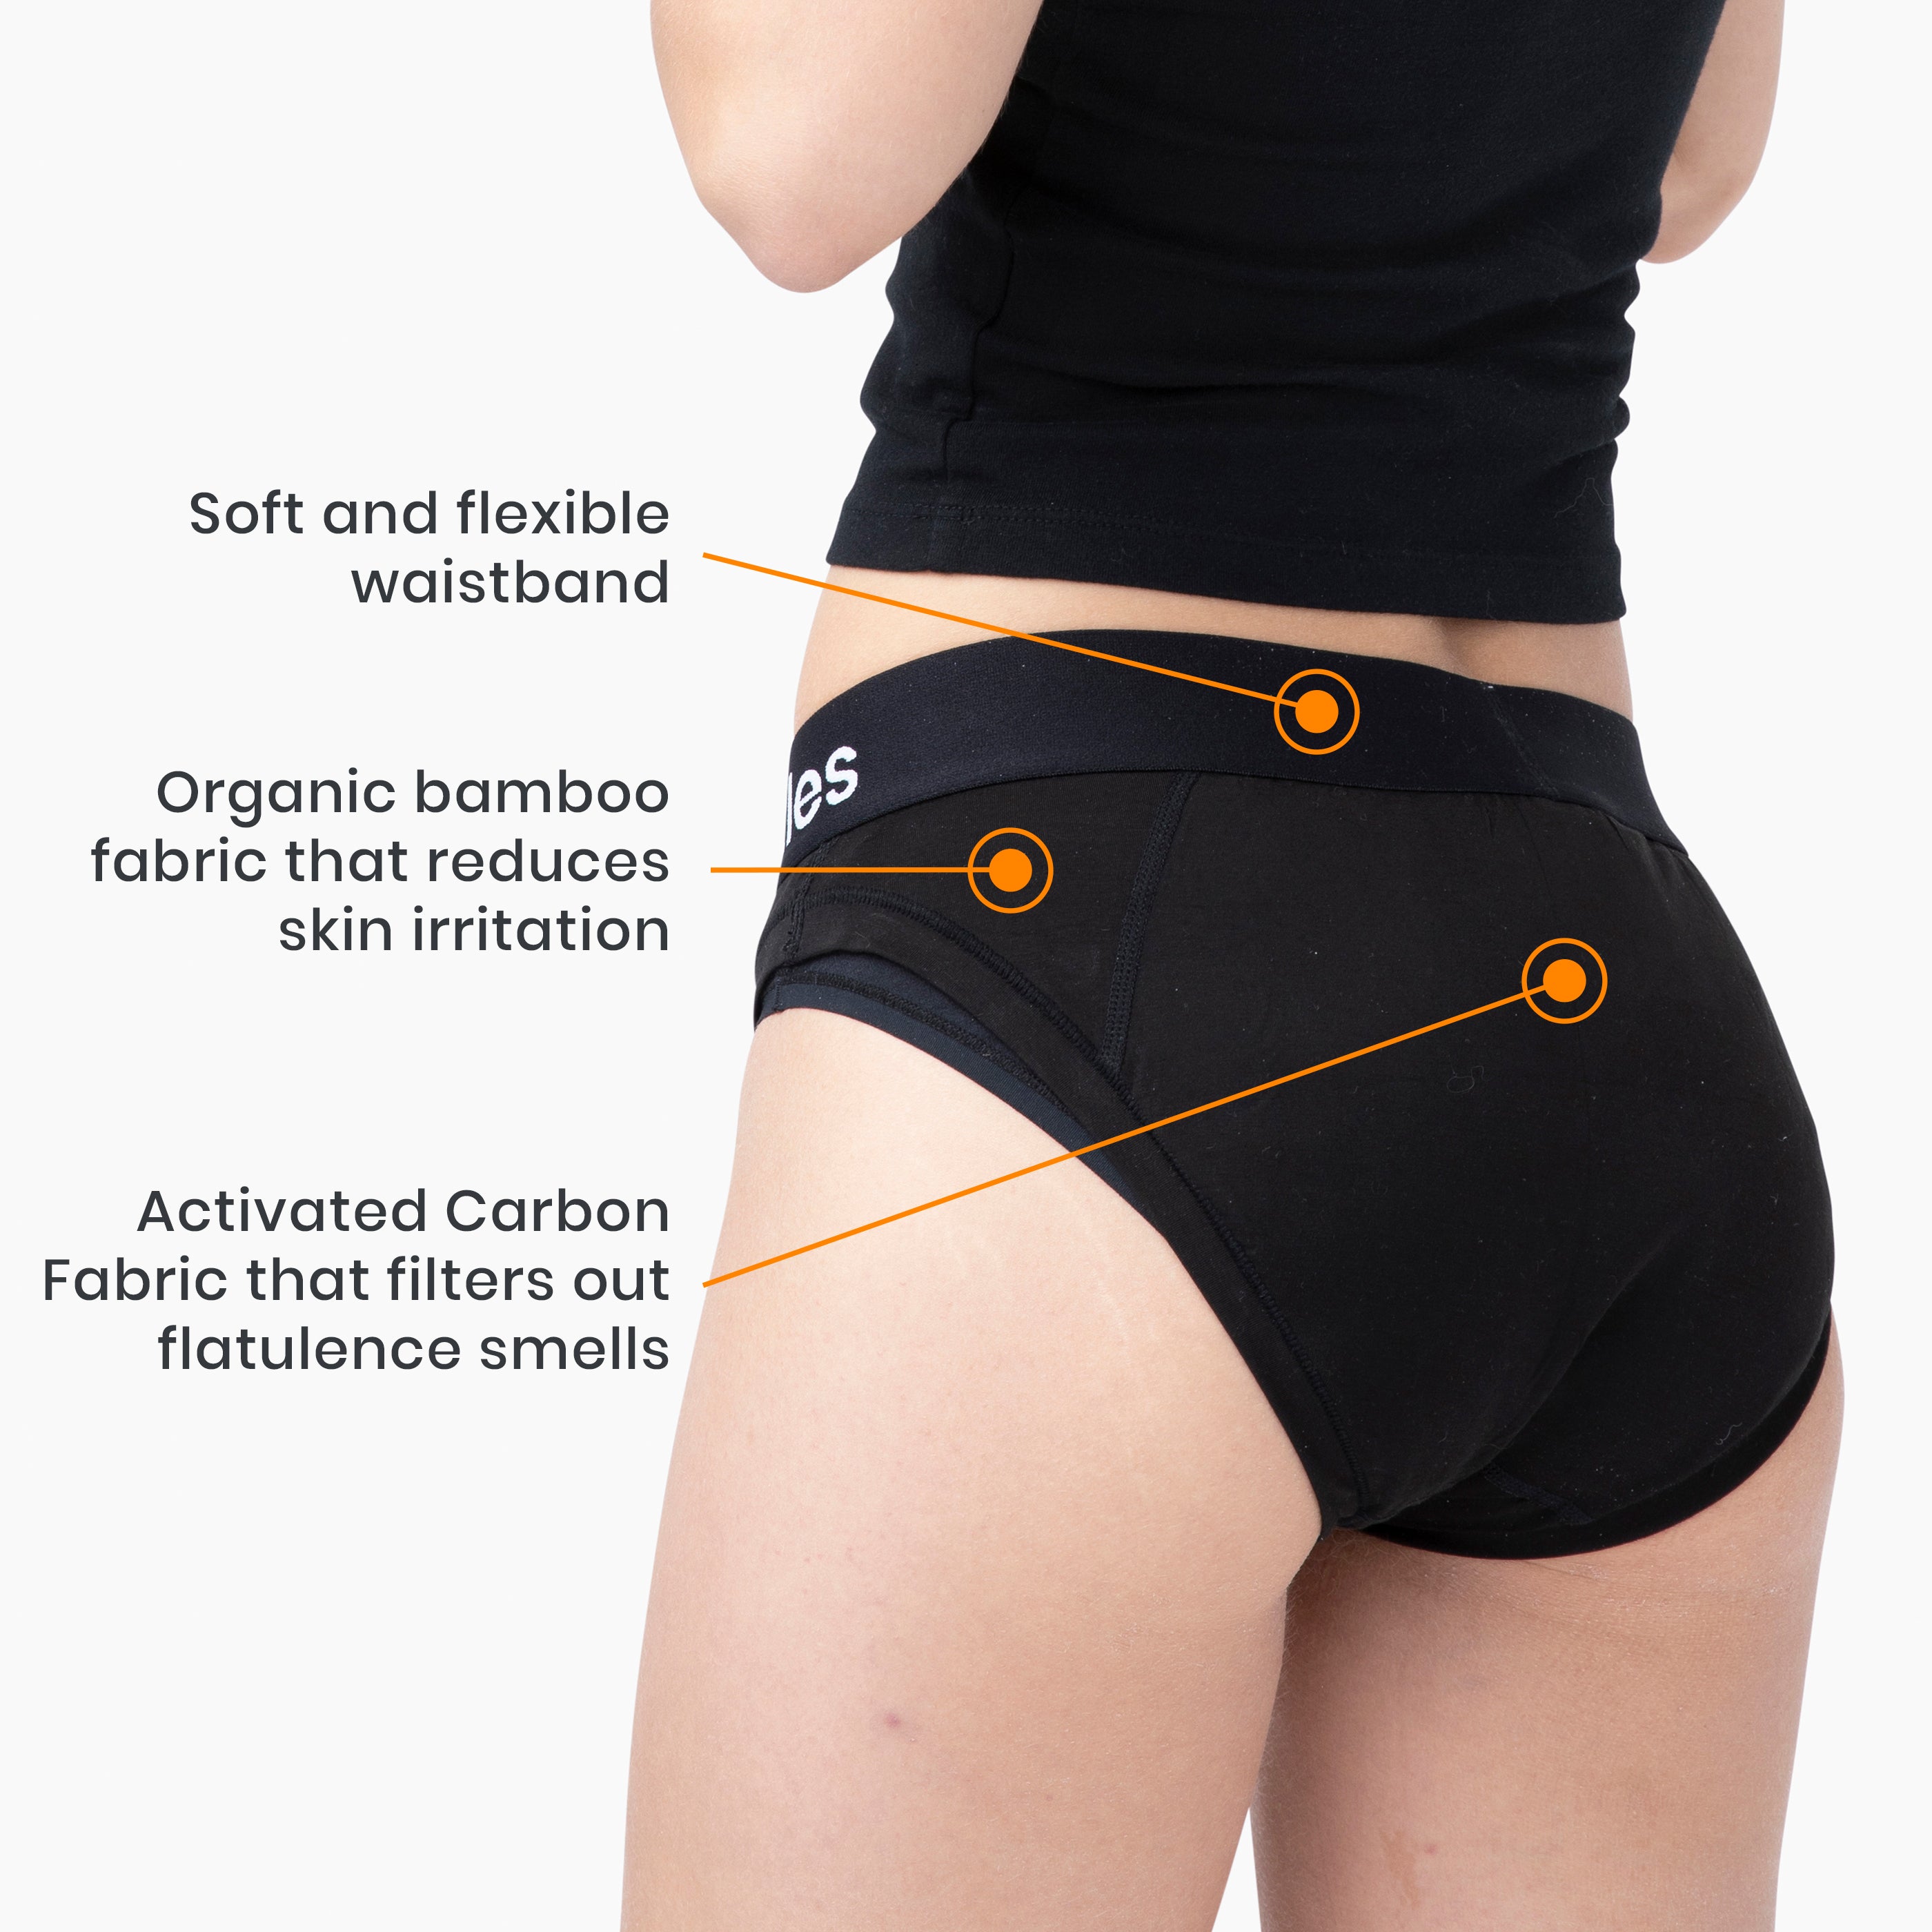 Shreddies is underwear that filters out the smell of your flatulence